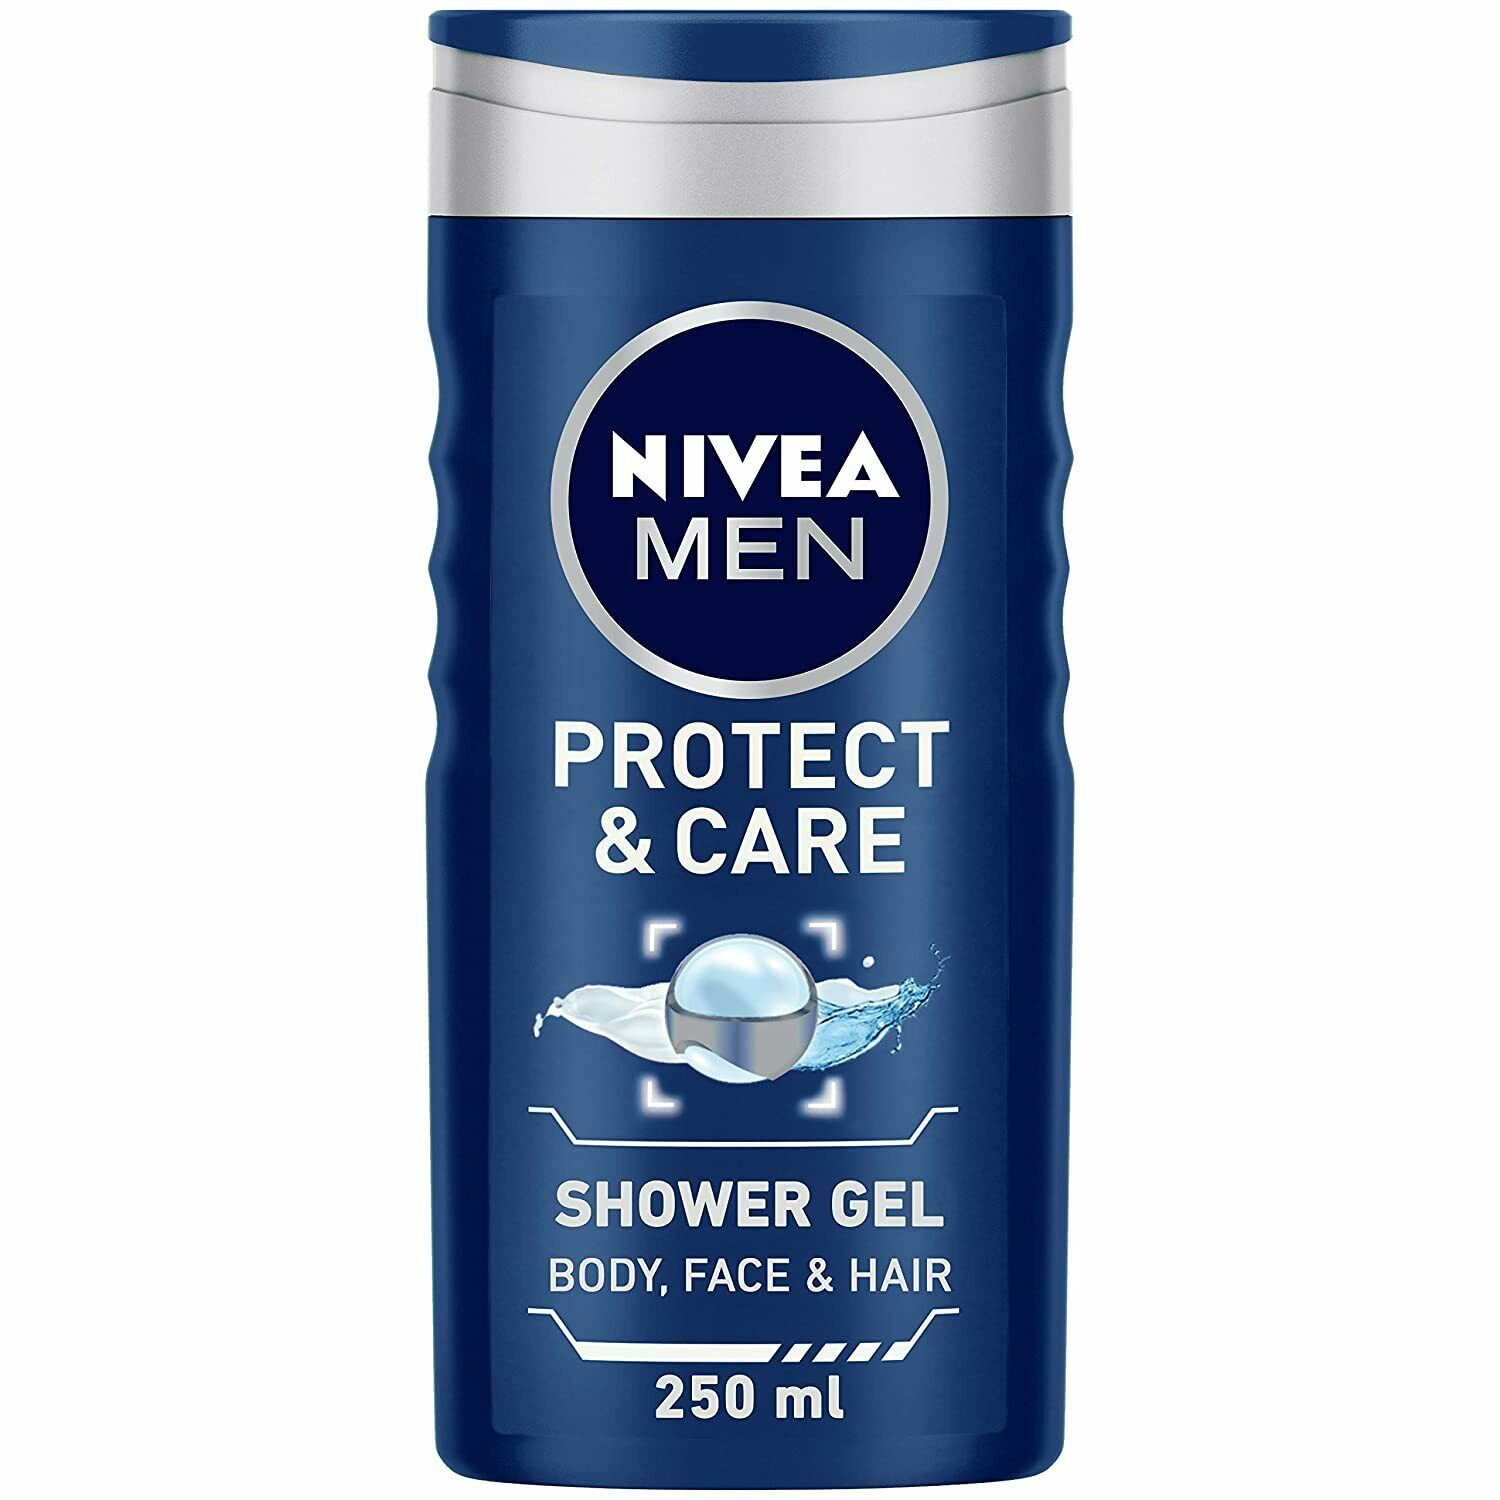 NIVEA Men Body Wash,Protect & Care with Aloe Vera, Shower Gel, 250ml (Pack of 1) - $14.10